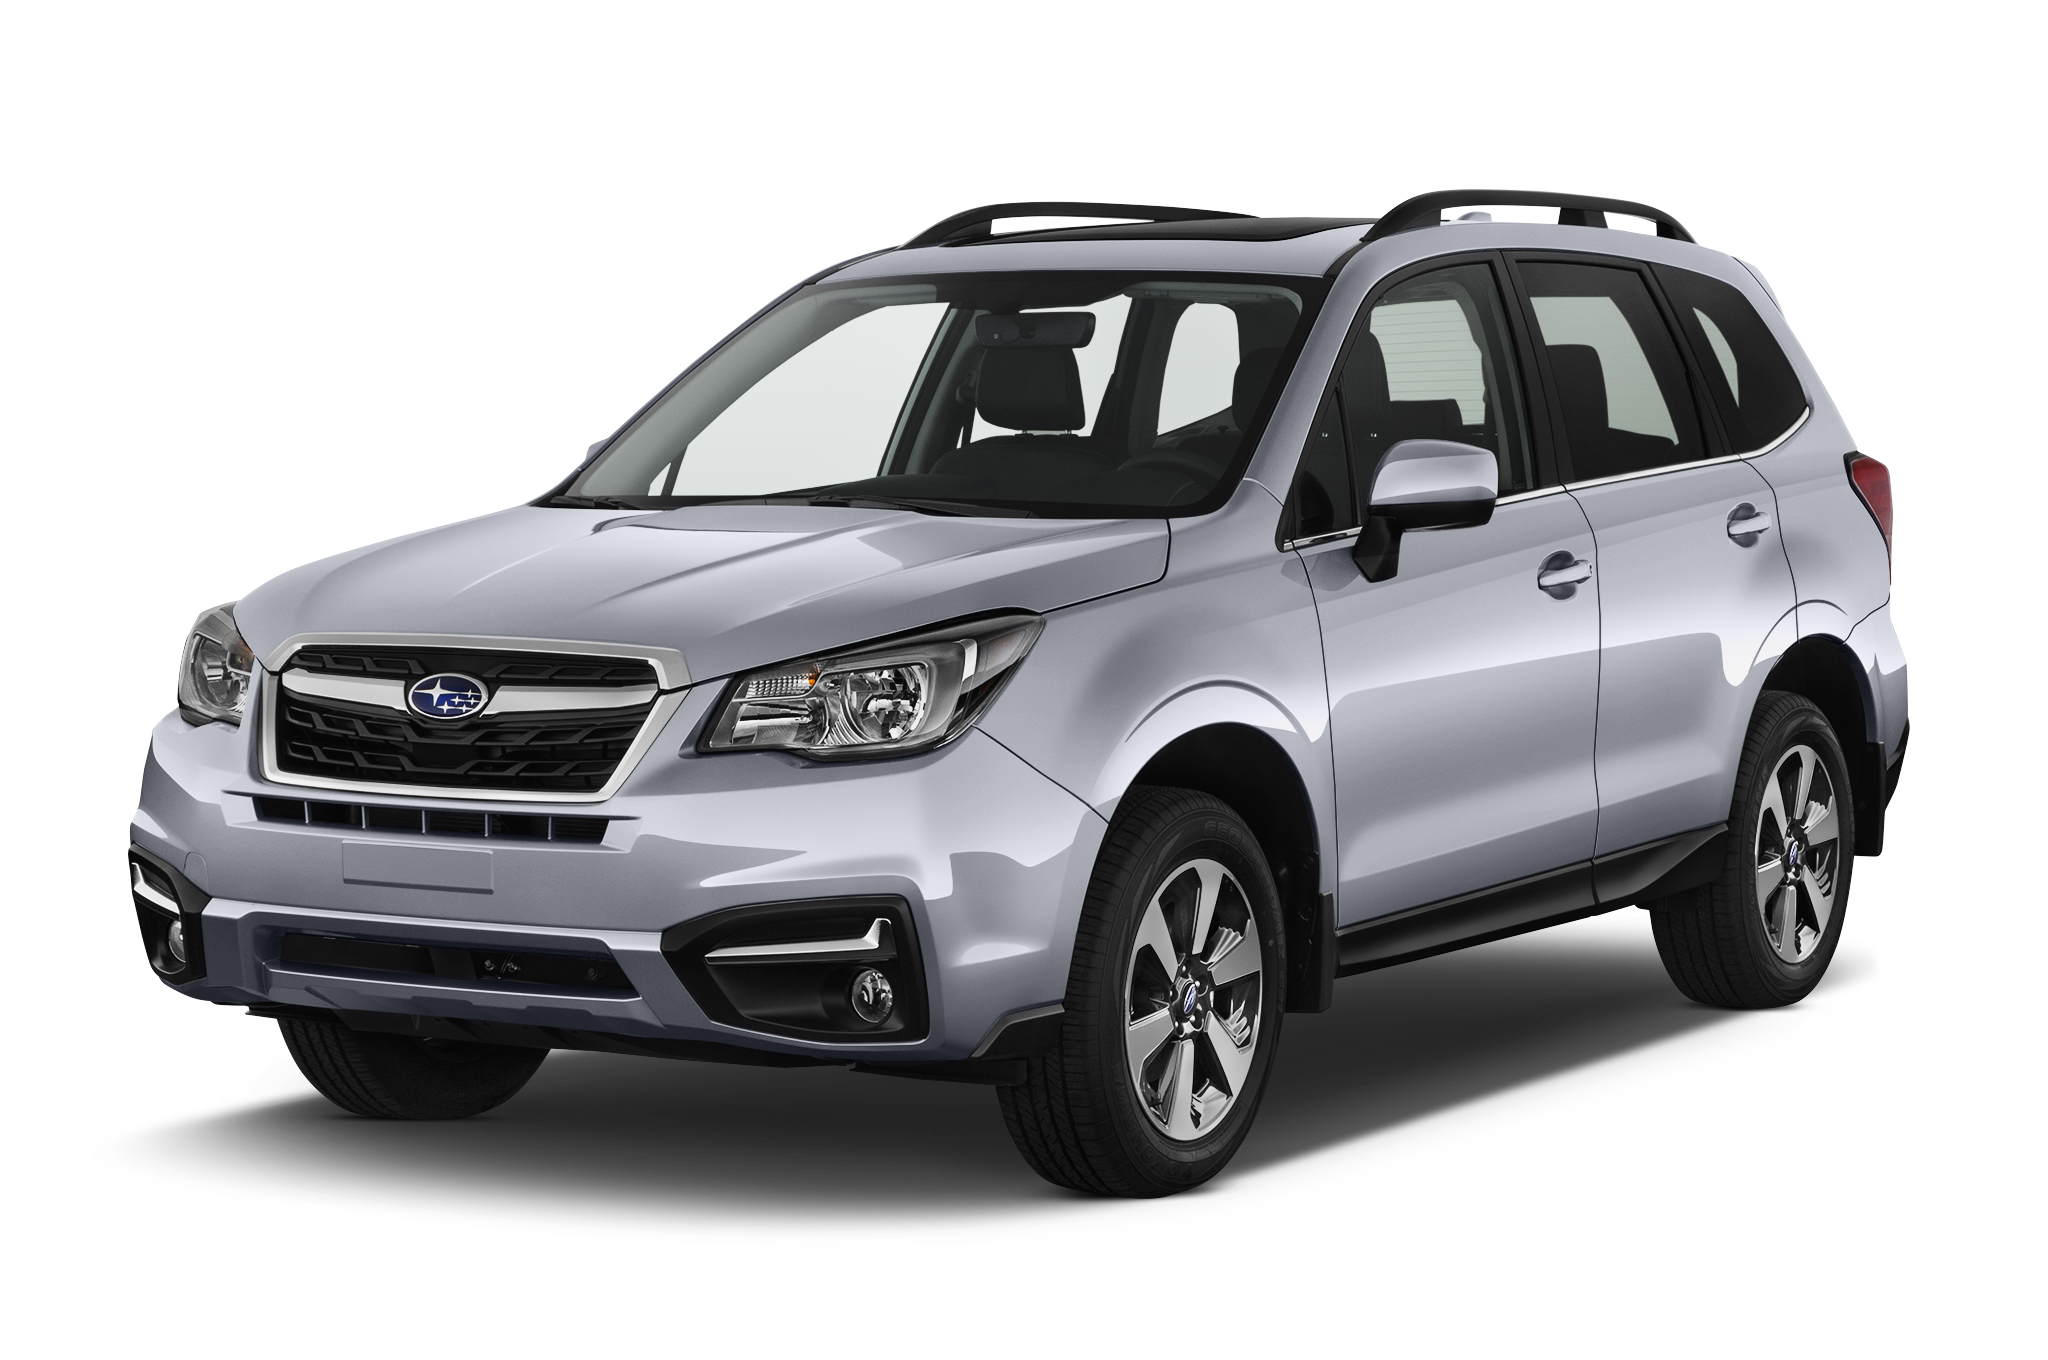 HQ Subaru Forester Wallpapers | File 1497.31Kb